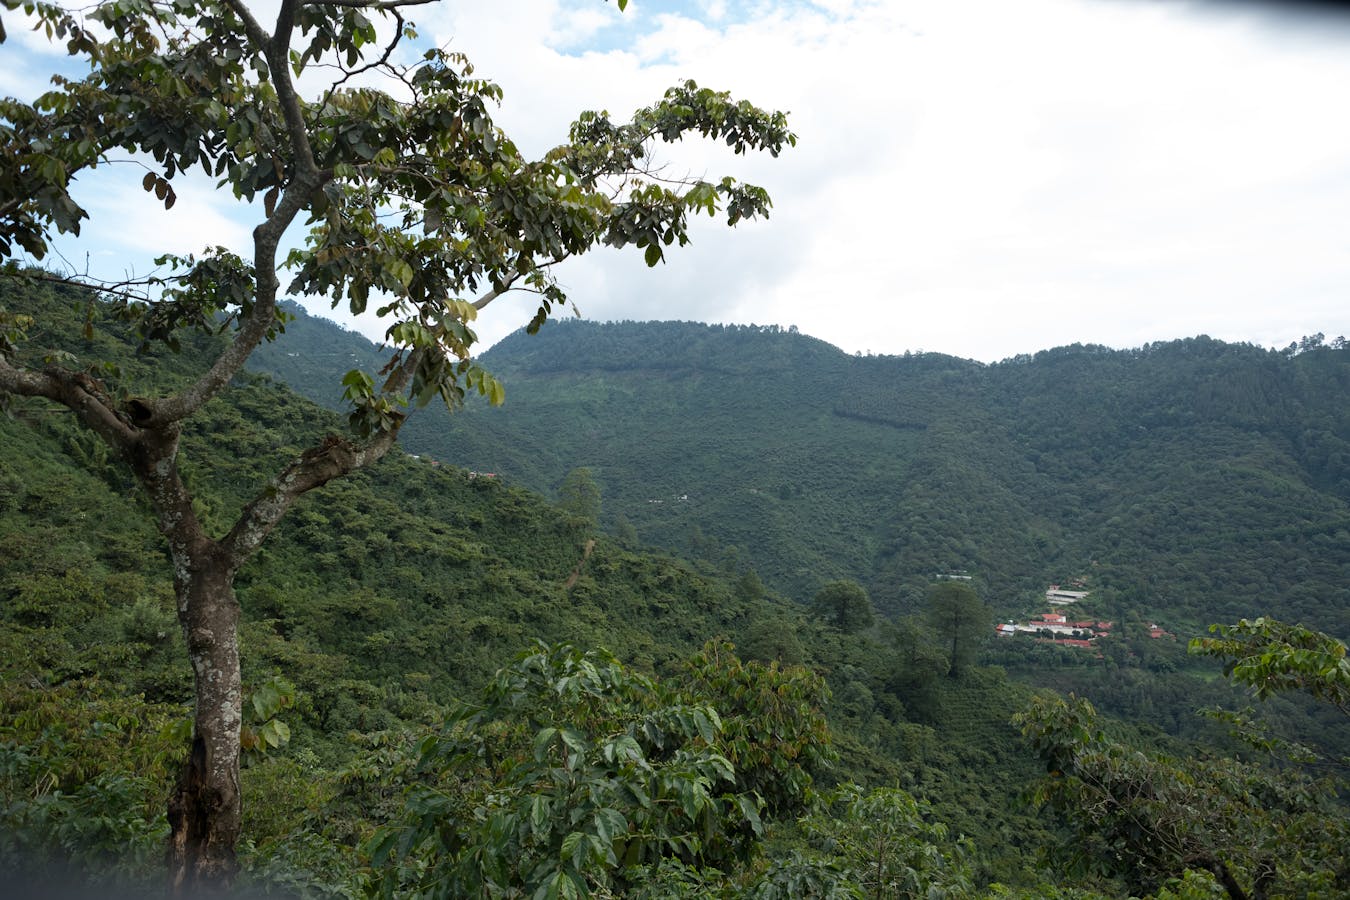 Monitoring visits of the Starbucks "One Tree for Every Bag" program in the Huehuetenango region of Guatemala.